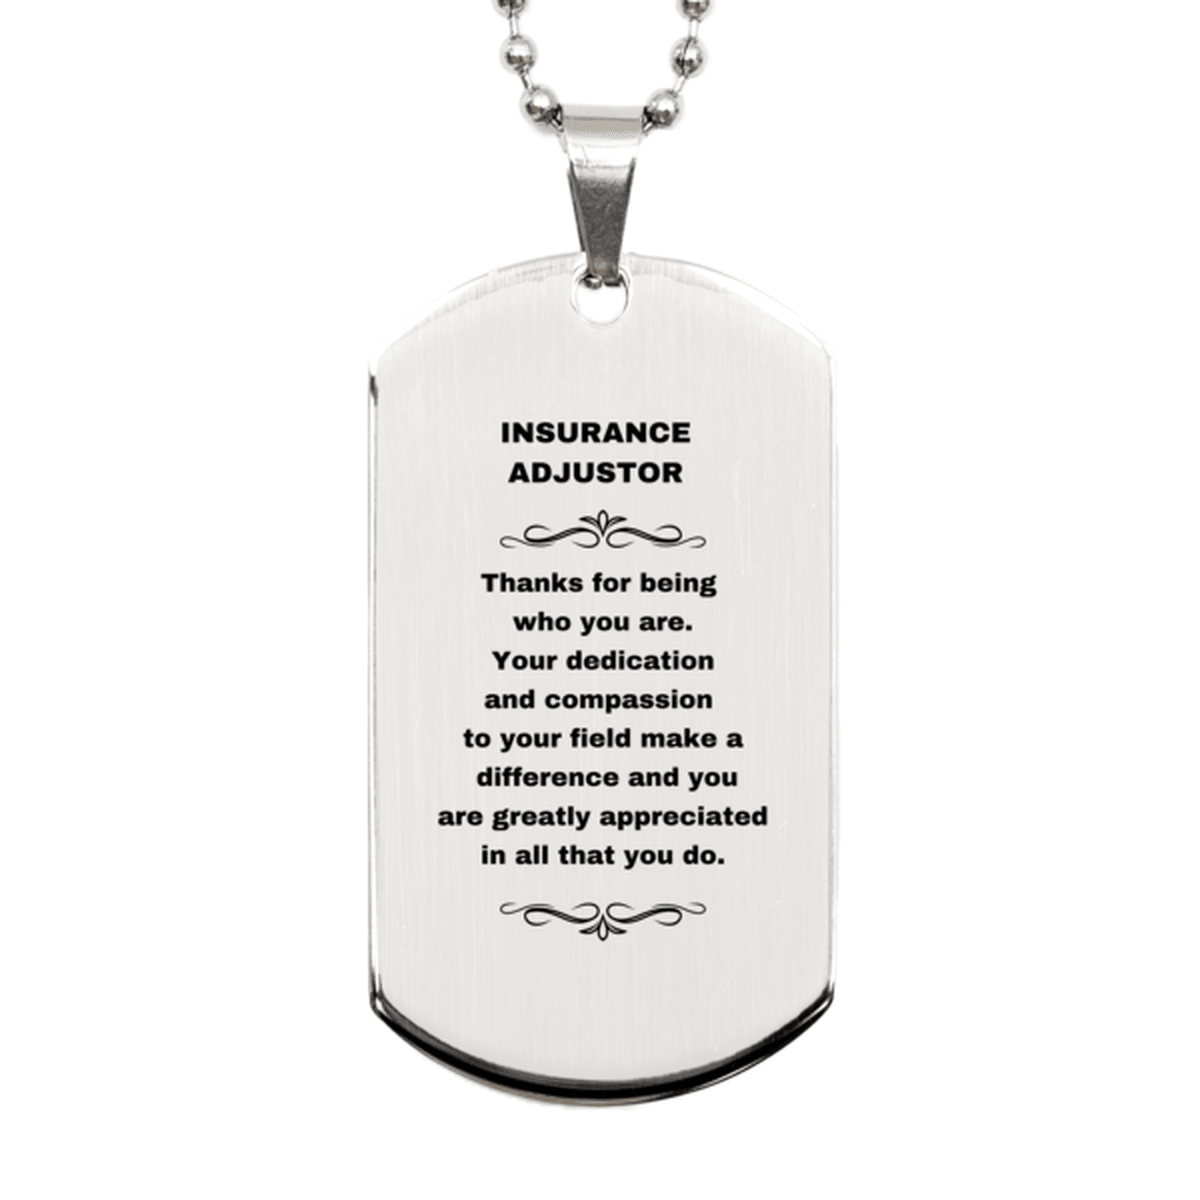 Insurance Adjustor Silver Dog Tag Necklace Engraved Bracelet - Thanks for being who you are - Birthday Christmas Jewelry Gifts Coworkers Colleague Boss - Mallard Moon Gift Shop